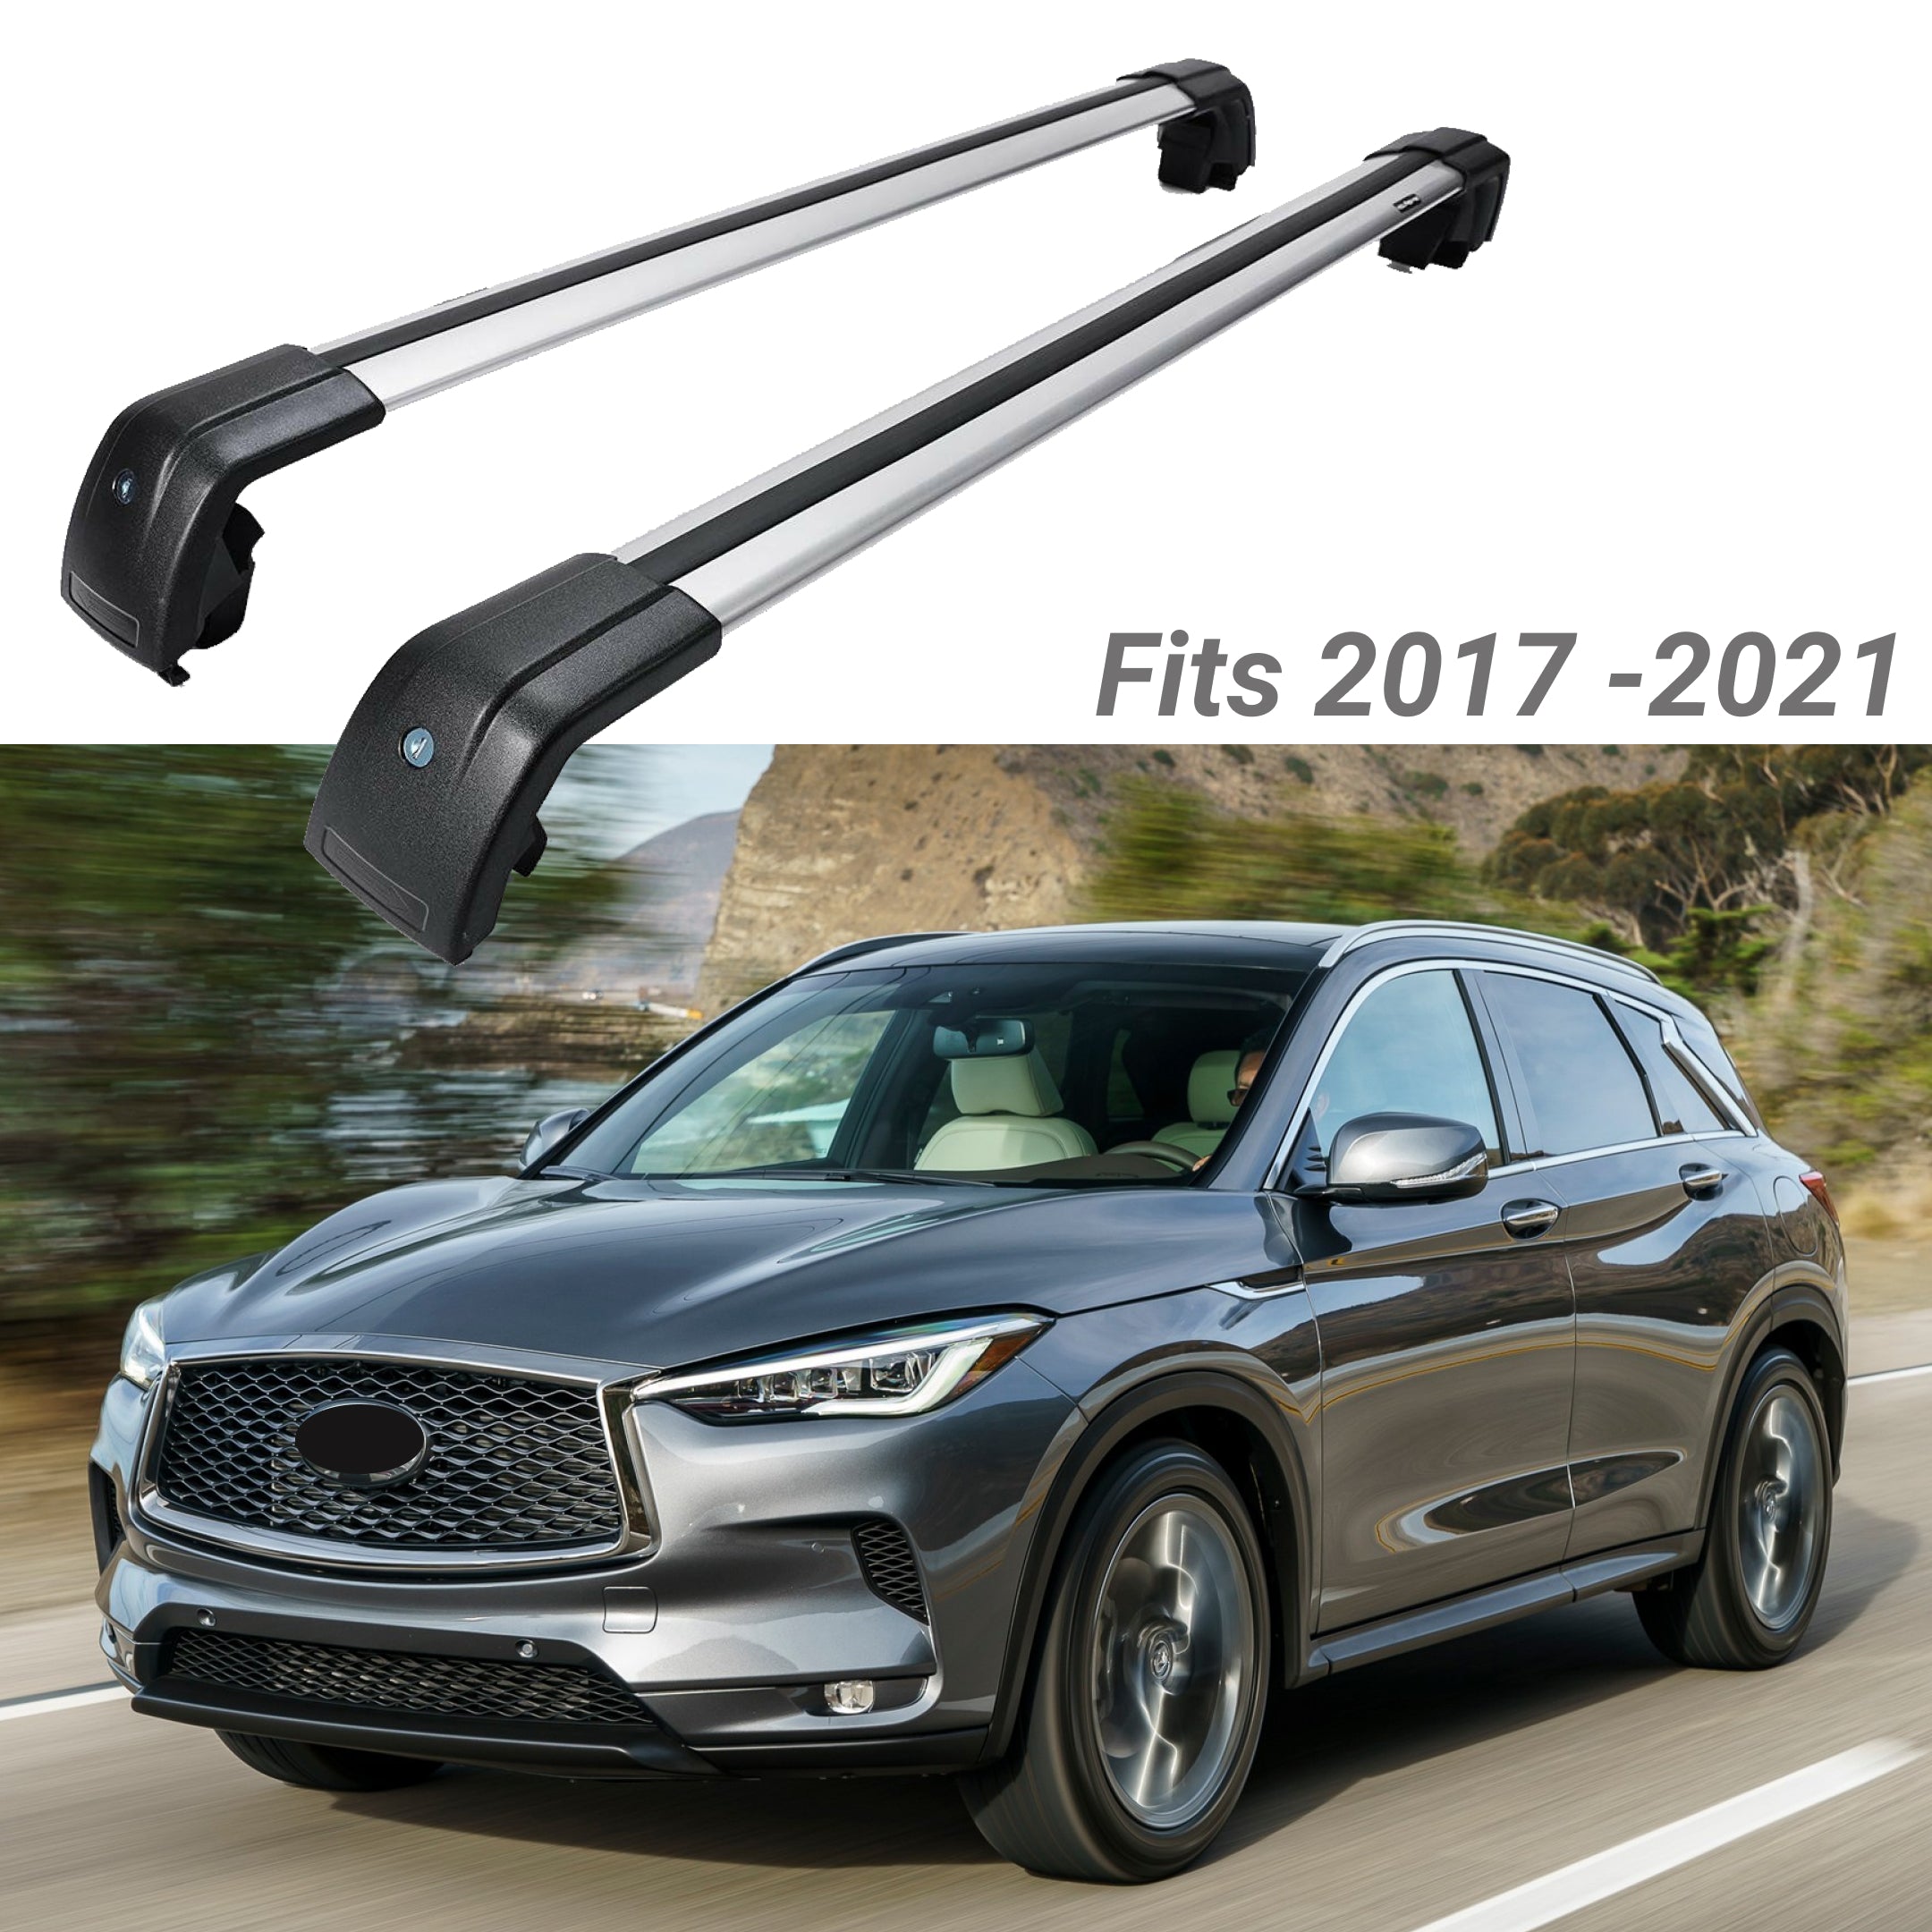 Fit 2017-2021 Infiniti QX50 SUV Top Roof Rack Cross Bar Baggage Luggage Carrier Bar - 0